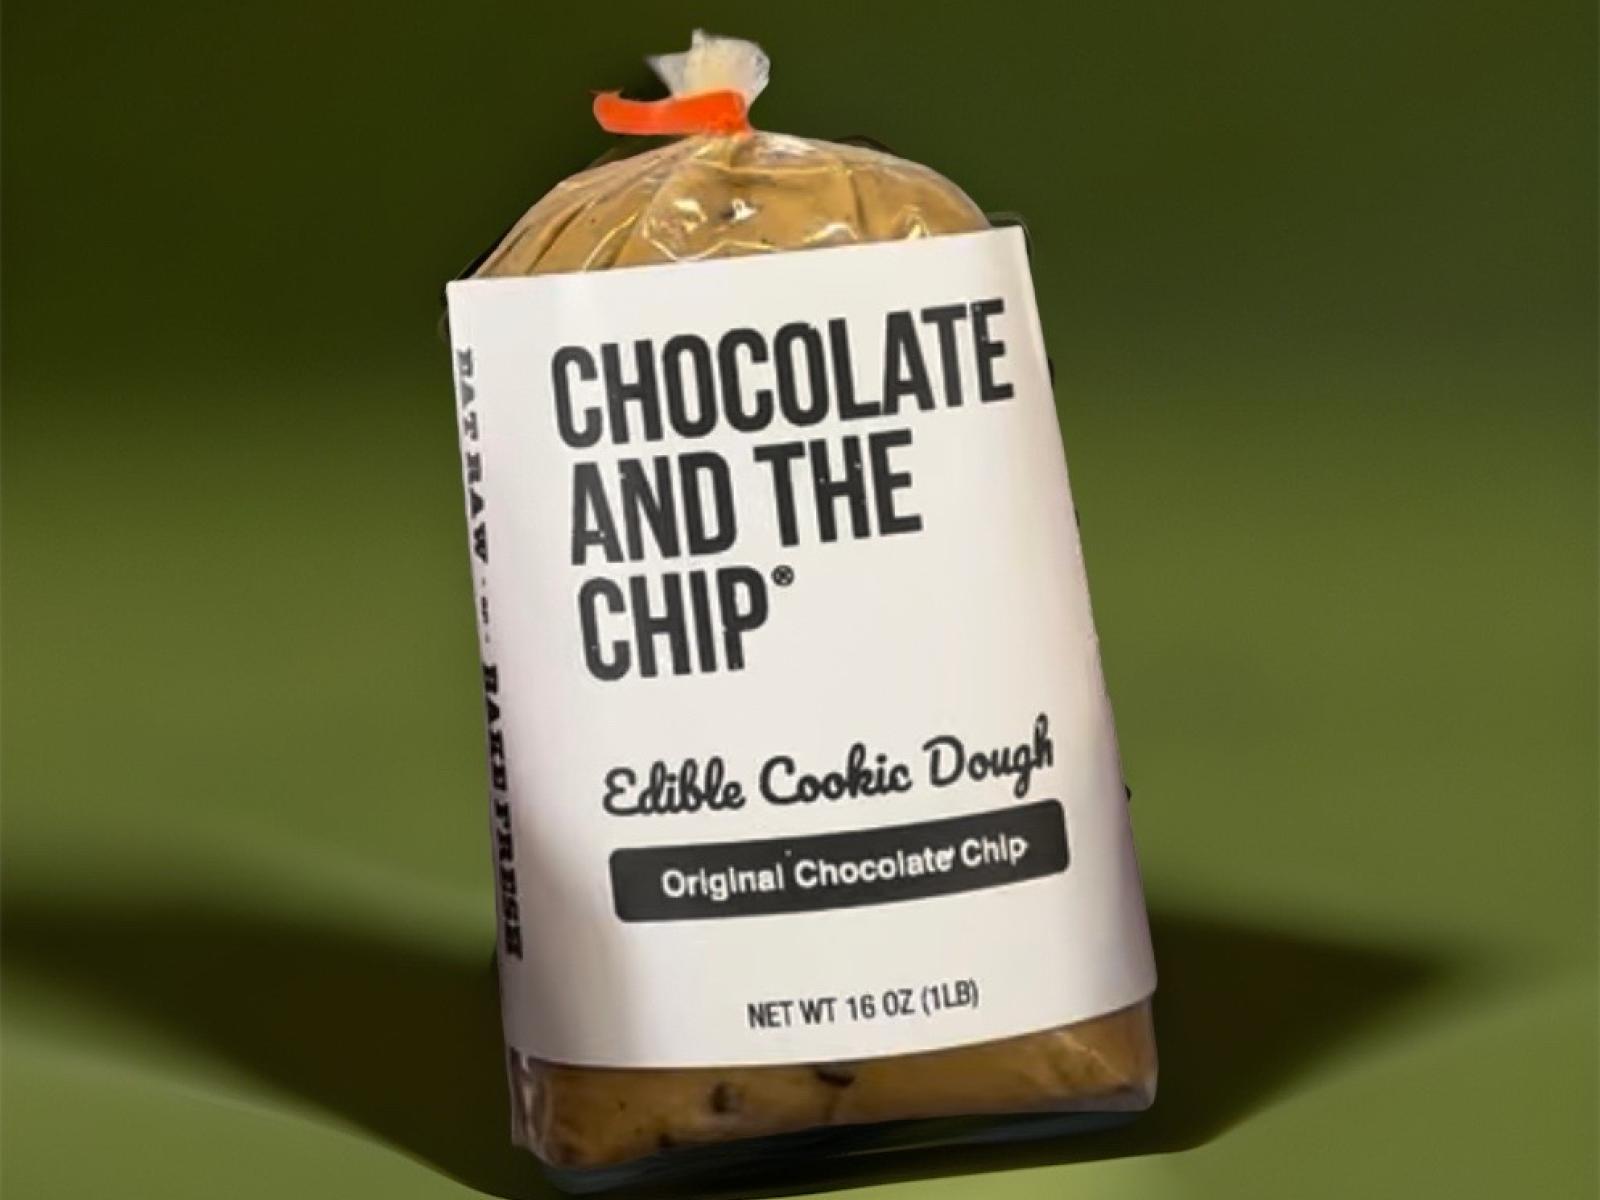 Main image for offer titled Edible and Ready-to-Bake Cookie Dough: March 1-12